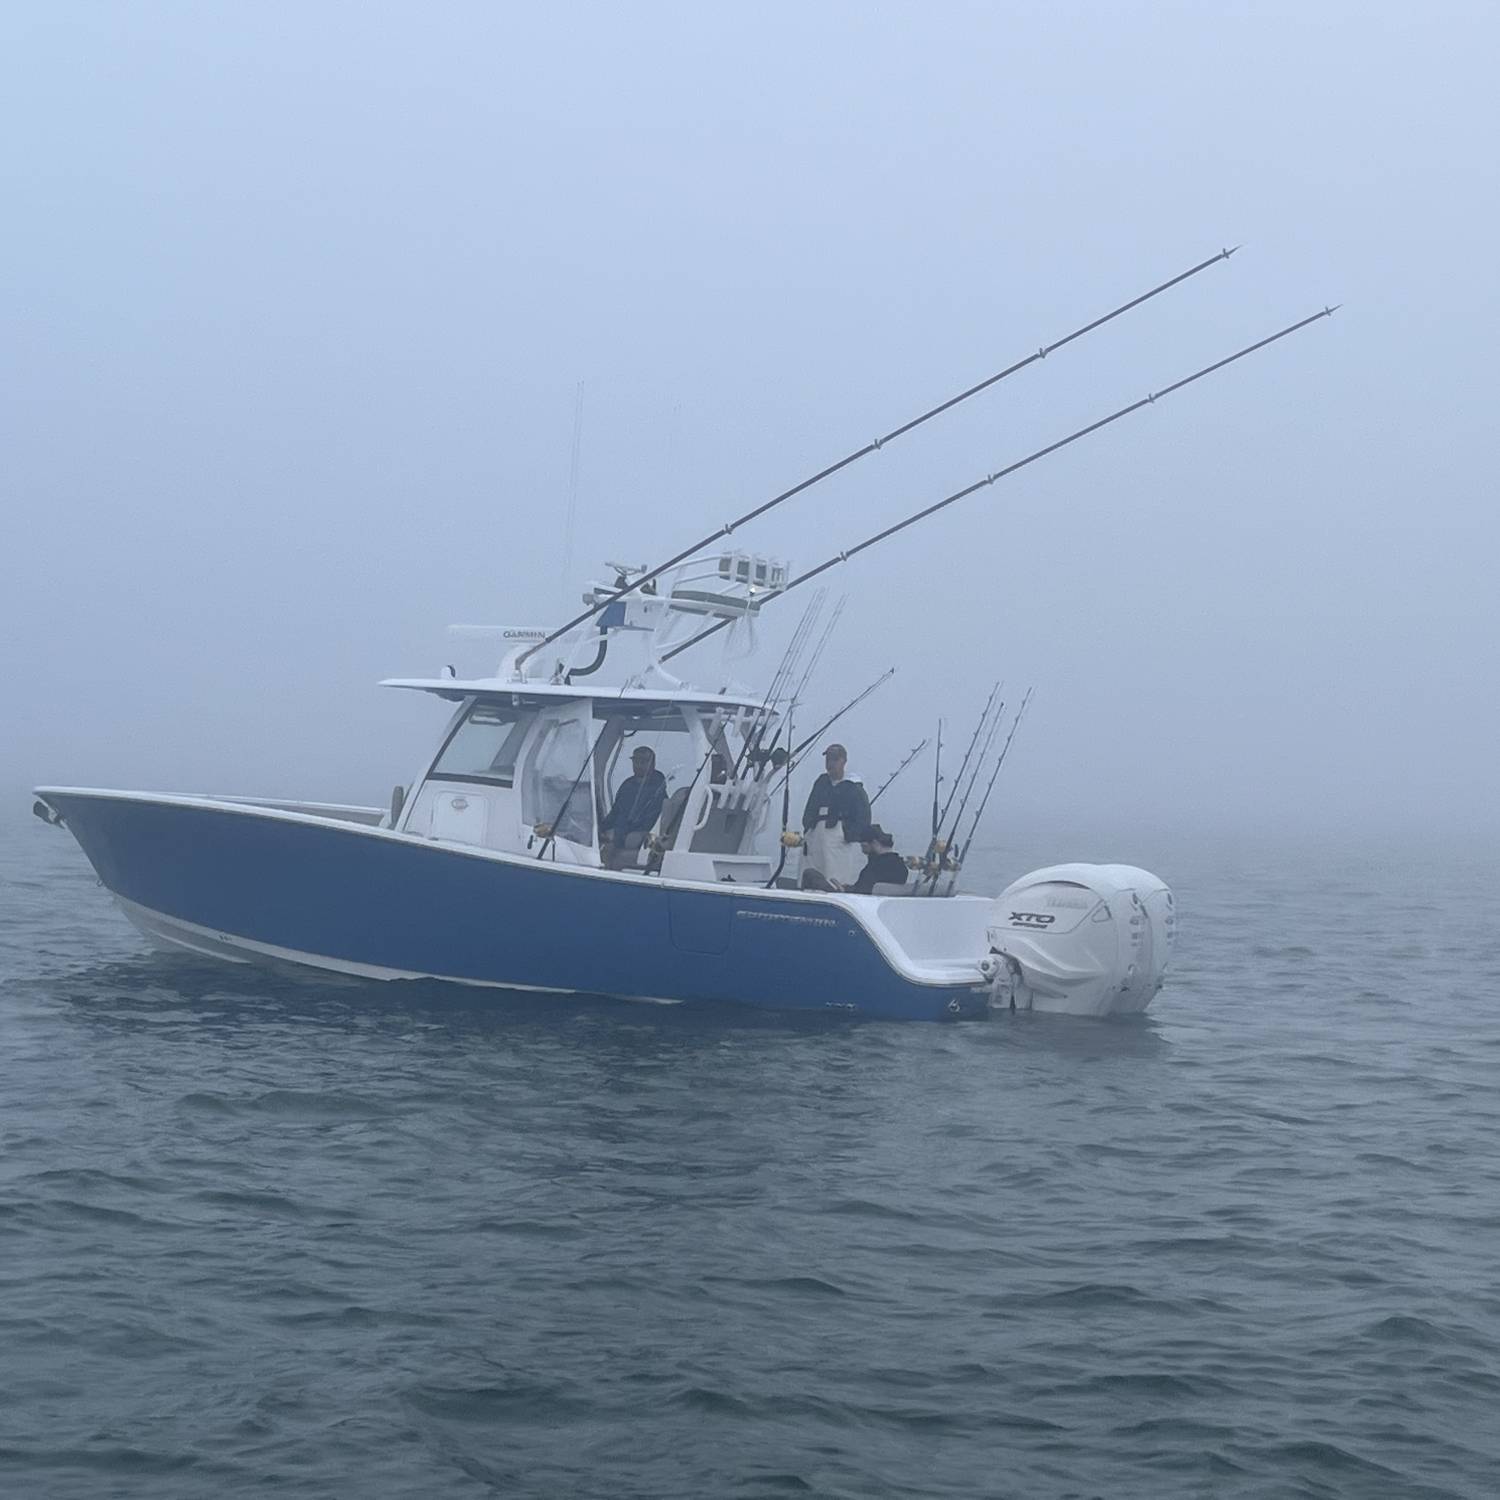 Heading into the fog on the way to Oregon inlet to tuna fish.